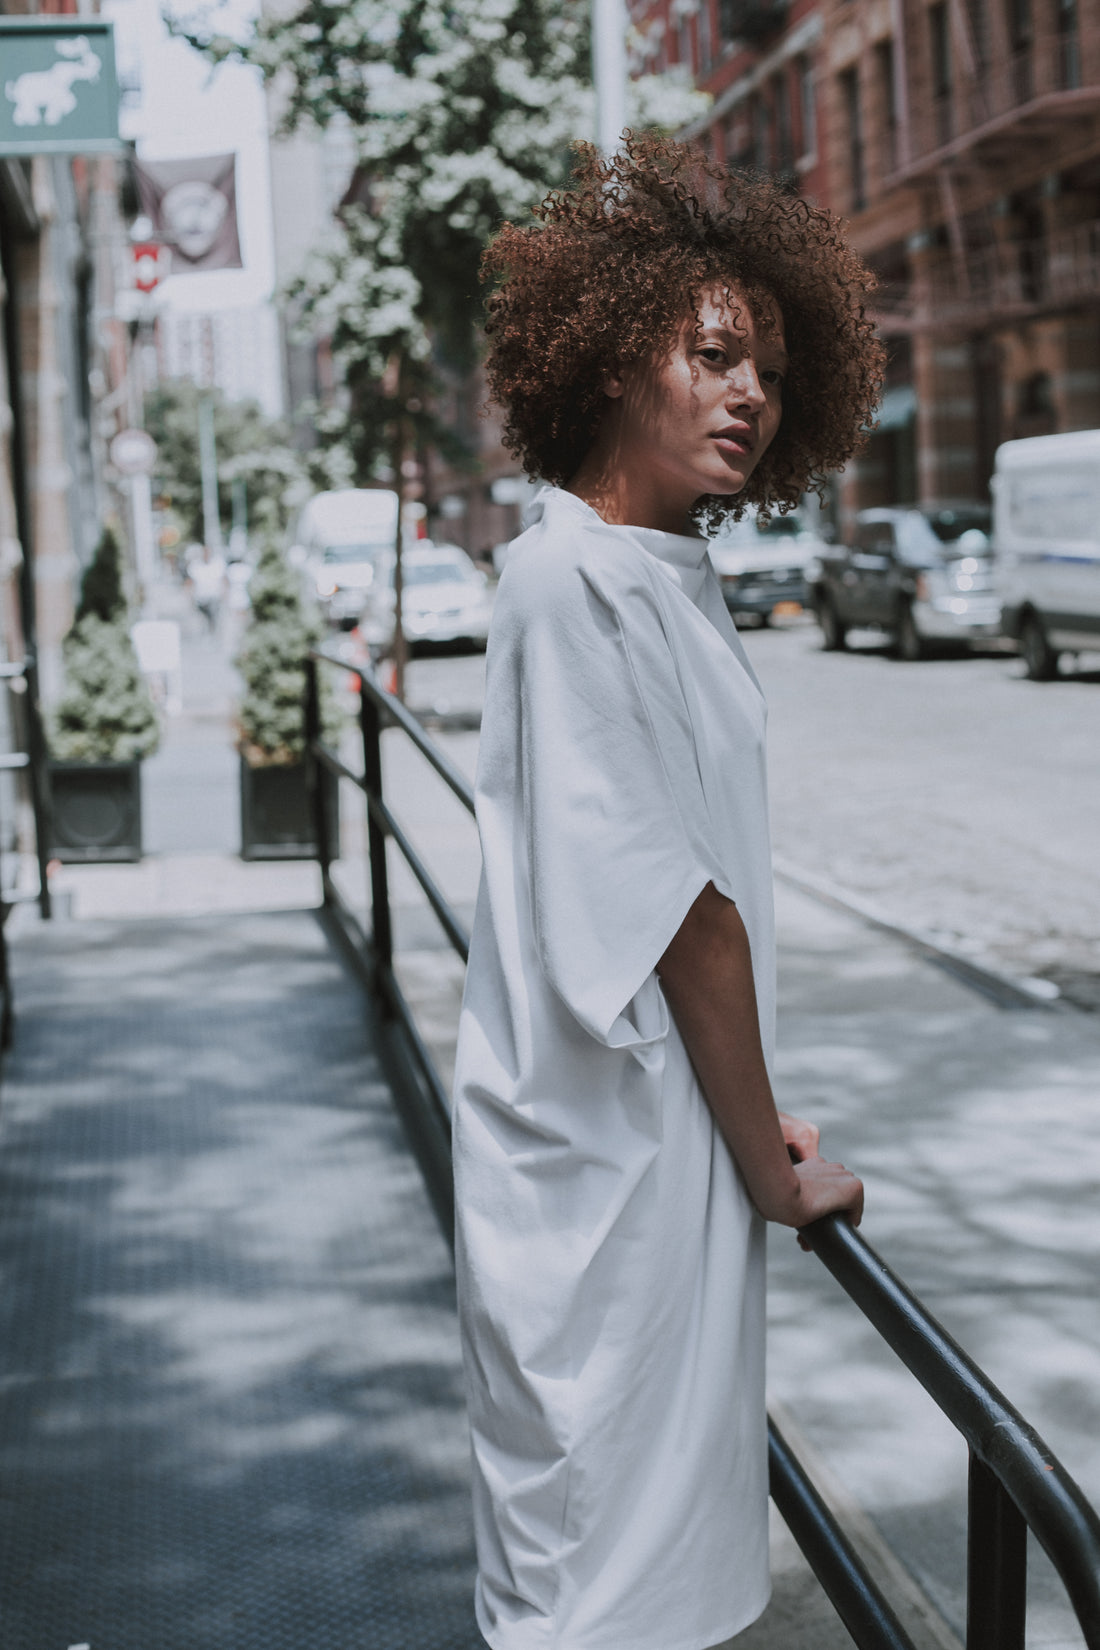 Model wearing our white shift dress in organic cotton. Made by Malaika New York